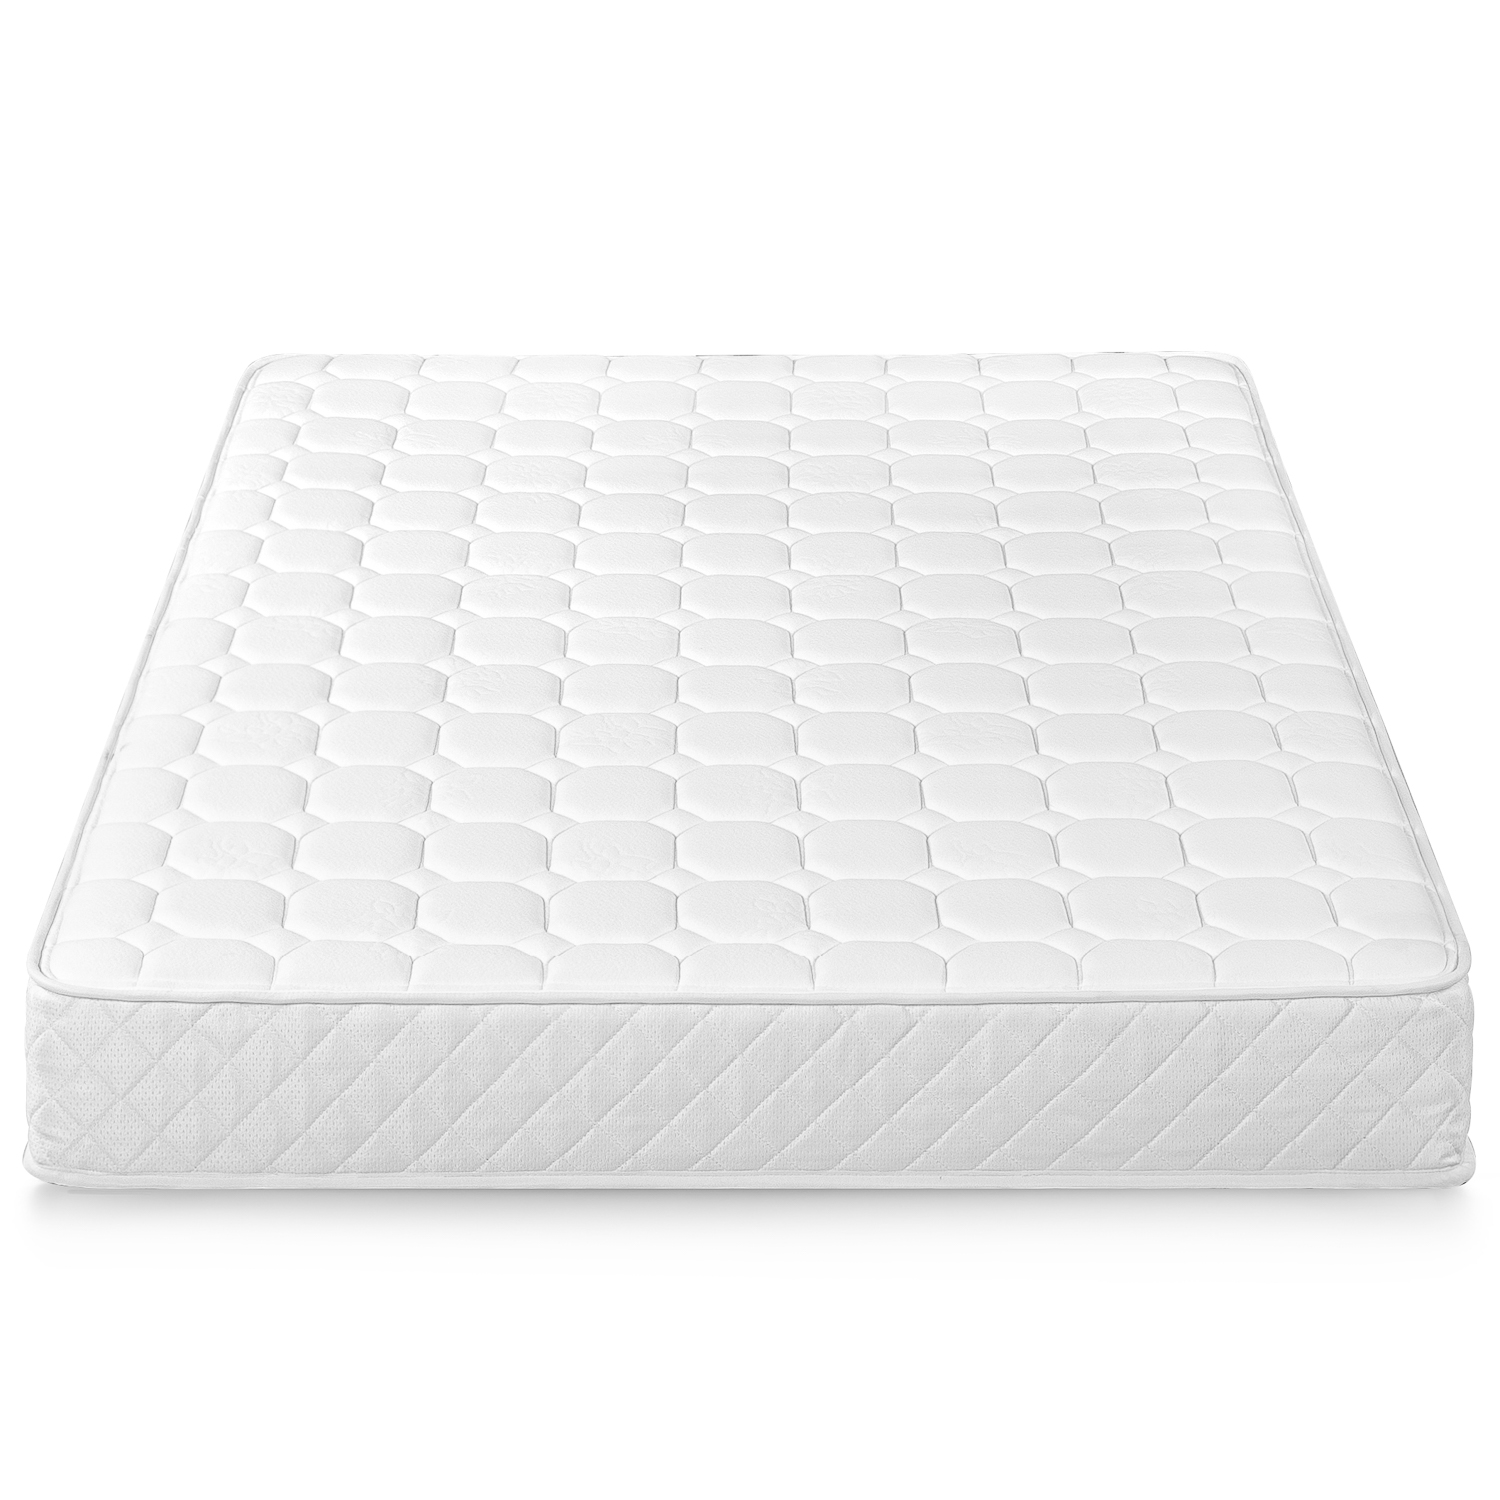 Zinus 8" Quilted Hybrid Mattress of Comfort Foam and Pocket Spring, Adult, Queen - image 4 of 9